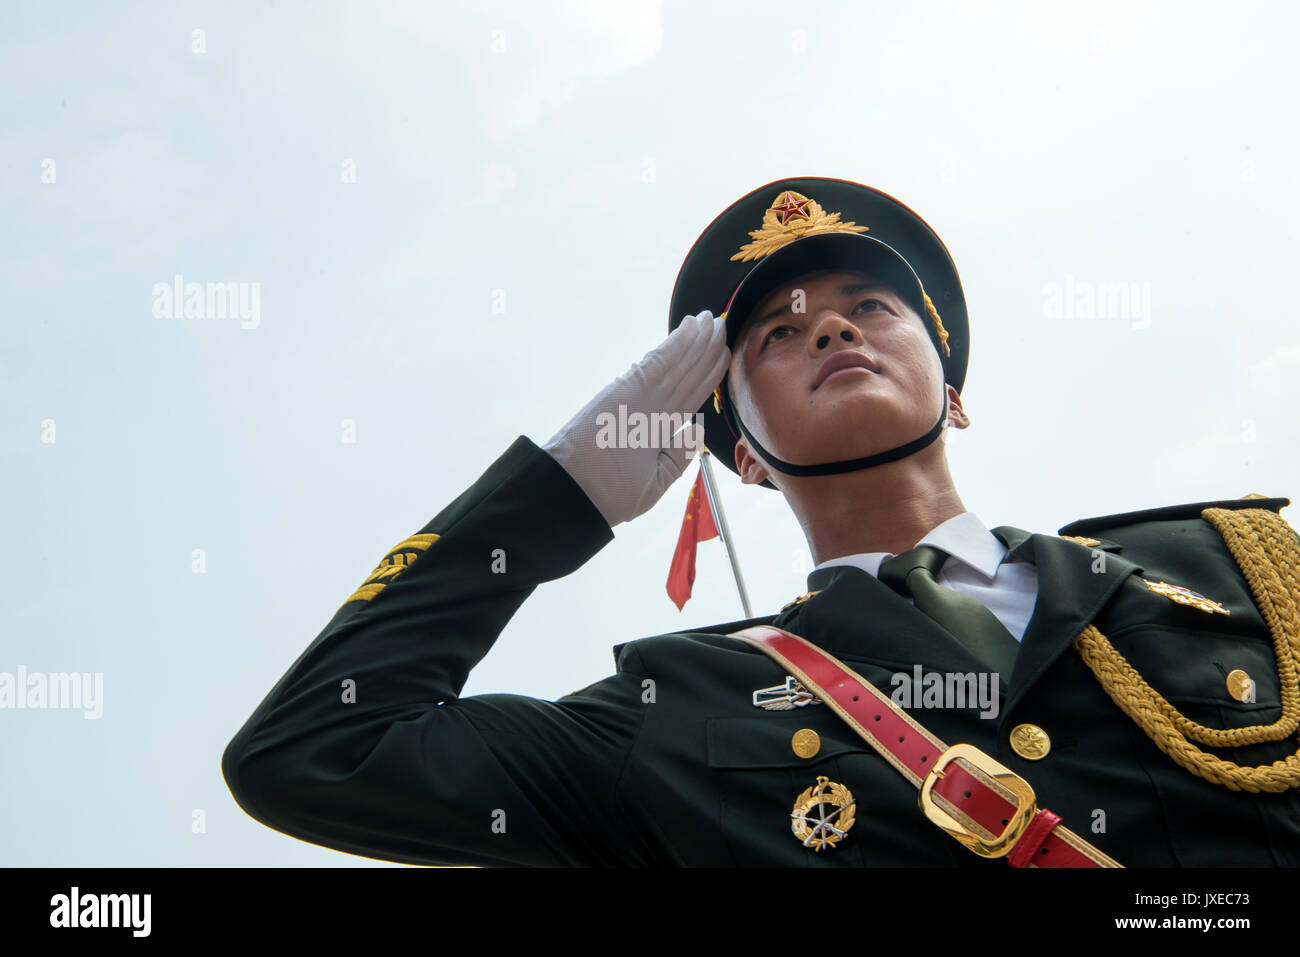 Beijing, China. 15th Aug, 2017. Chinese People's Liberation Army honor guard during a red carpet arrival ceremony for U.S. Chairman of the Joint Chiefs Gen. Joseph Dunford at the Bayi building August 15, 2017 in Beijing, China. Dunford is in Beijing to strengthen communication between the two militaries amid tensions concerning North Korea. Credit: Planetpix/Alamy Live News Stock Photo